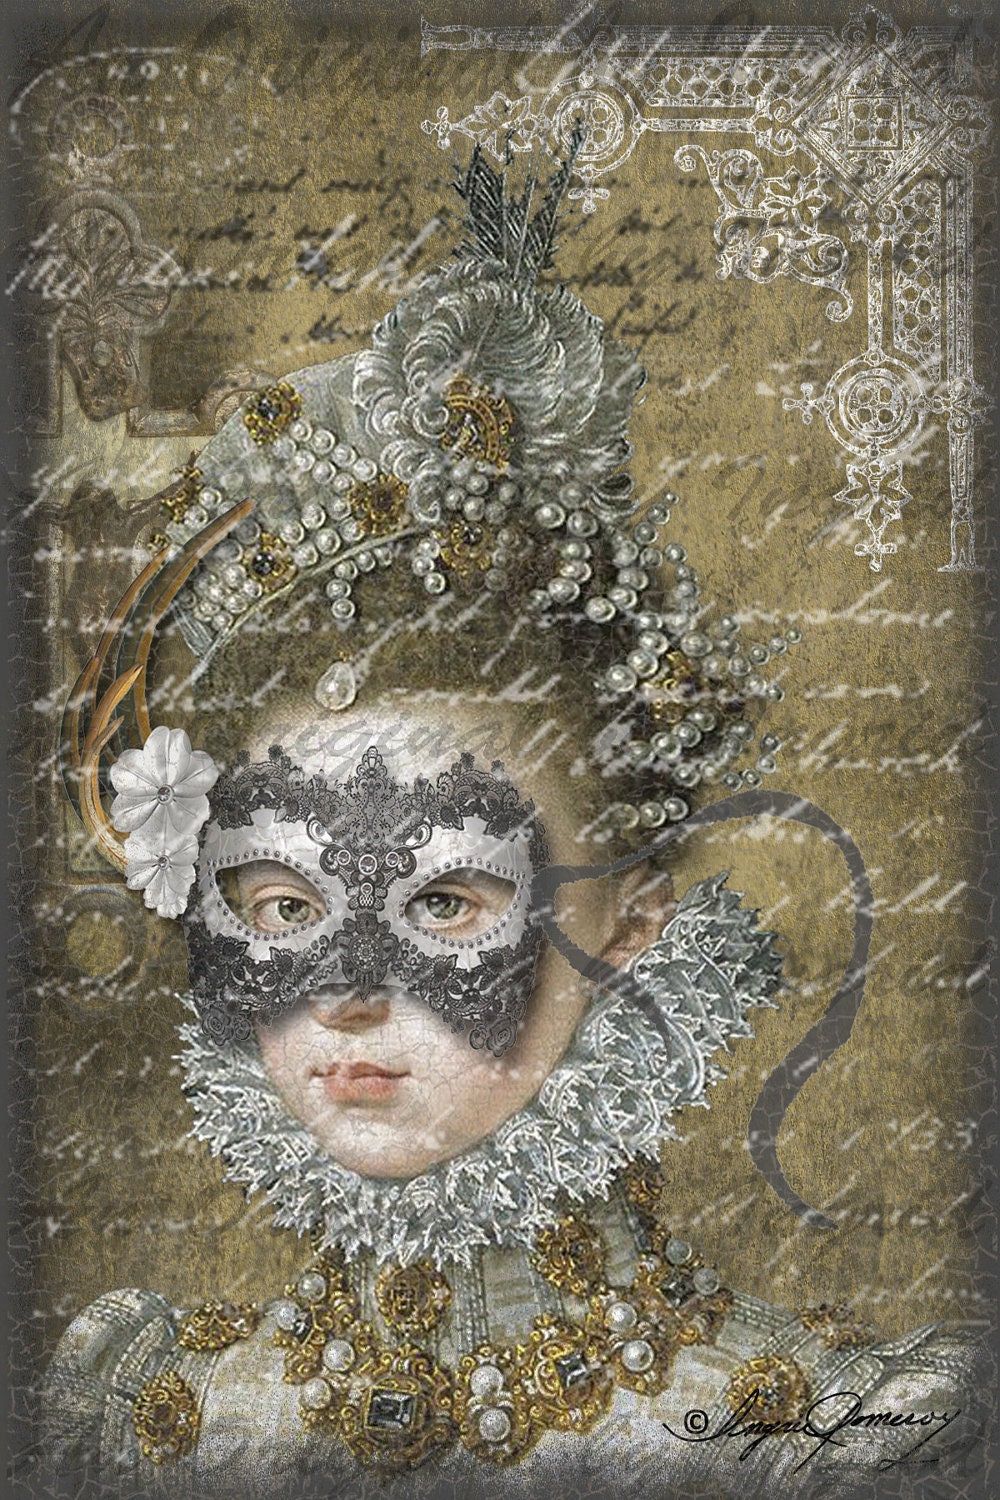 Elizabethan Queen with Mask and Writing Digital Collage Greeting Card (Suitable for Framing)